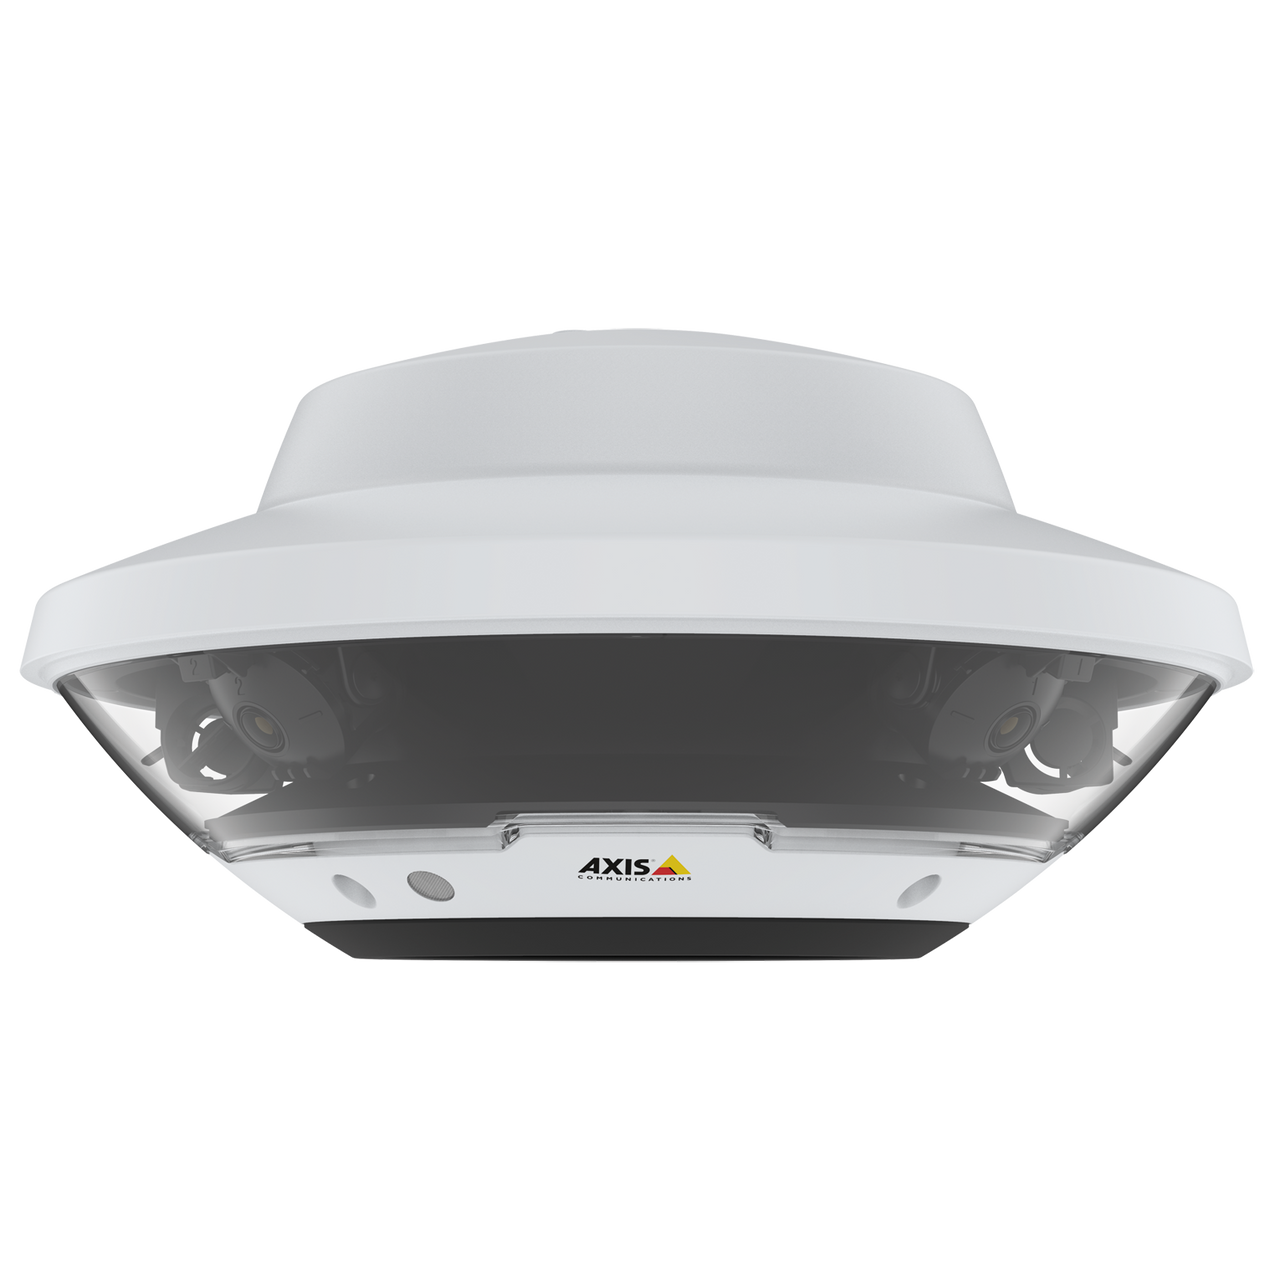 AXIS Q6100-E 60HZ For 360° real-time monitoring and great detail